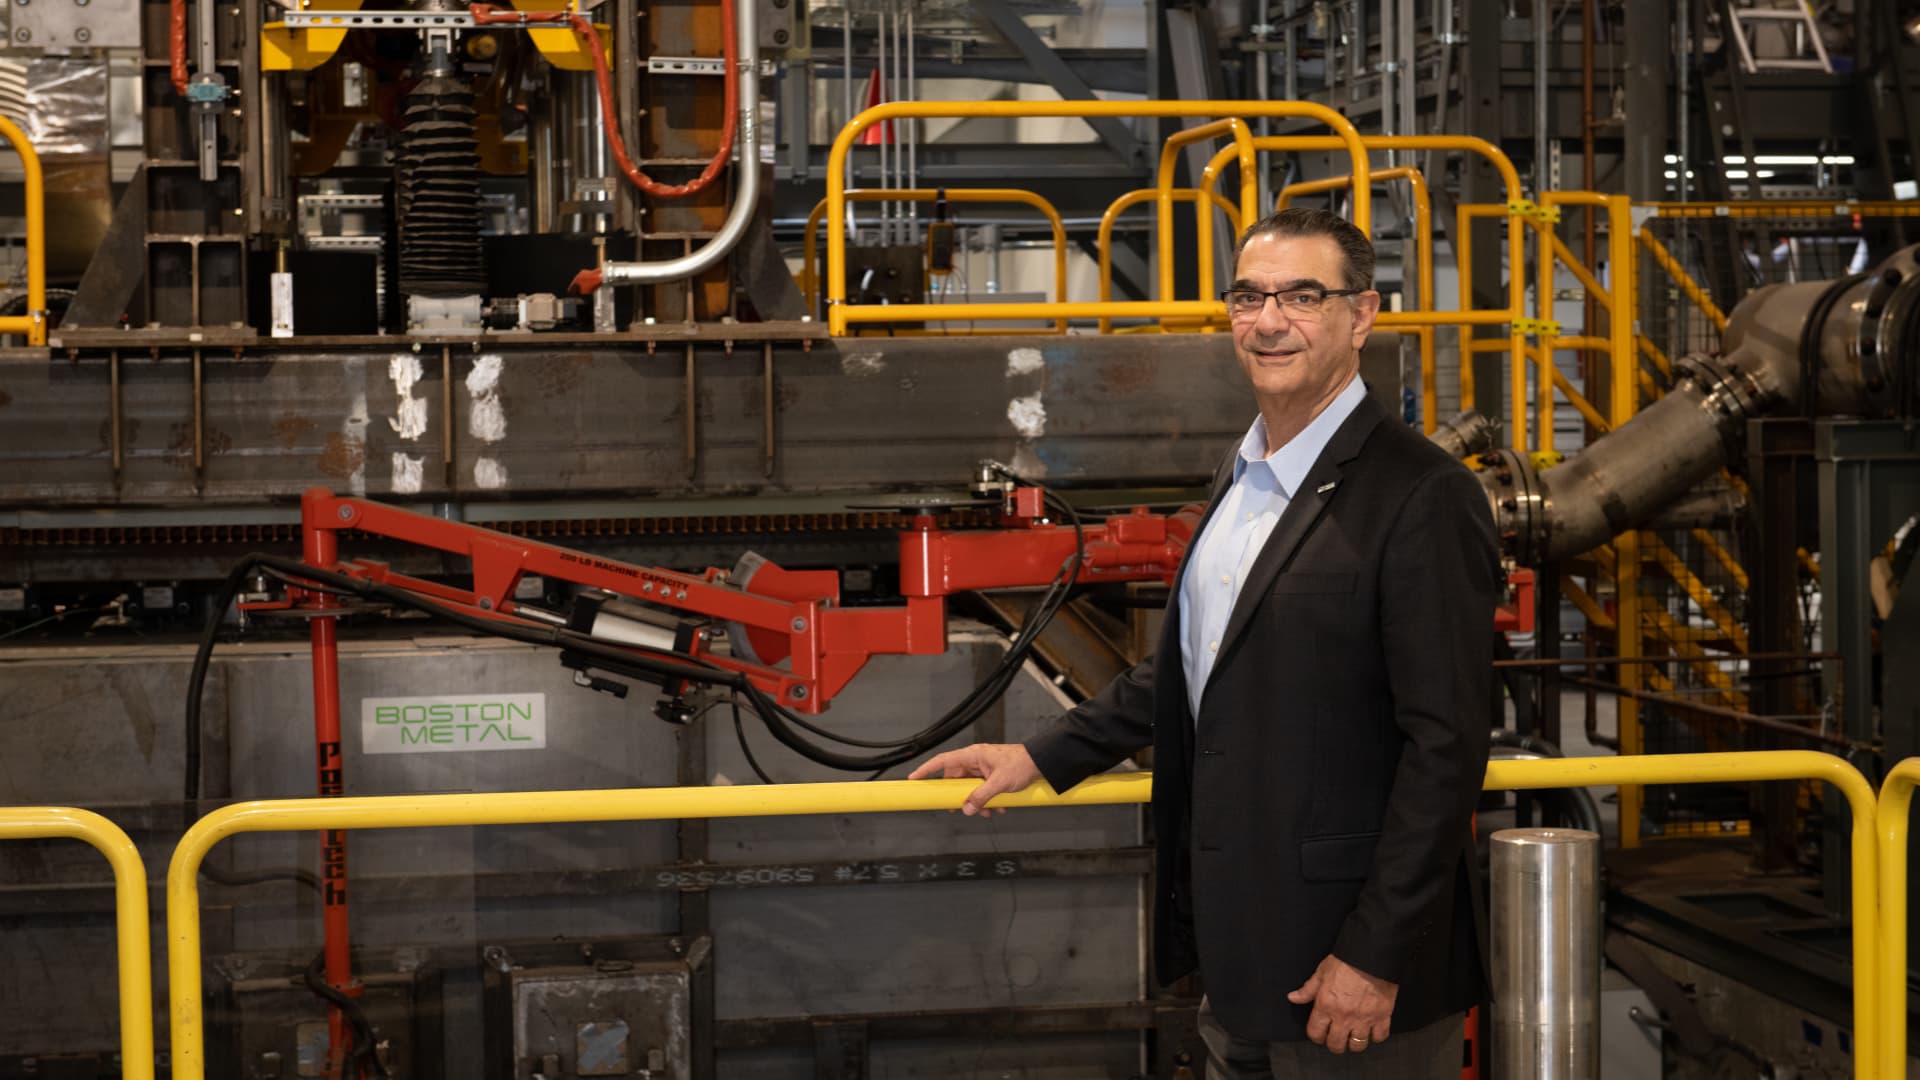 Boston Metal CEO Tadeu Carneiro worked in the steel industry for decades before coming on to lead the MIT spin out.